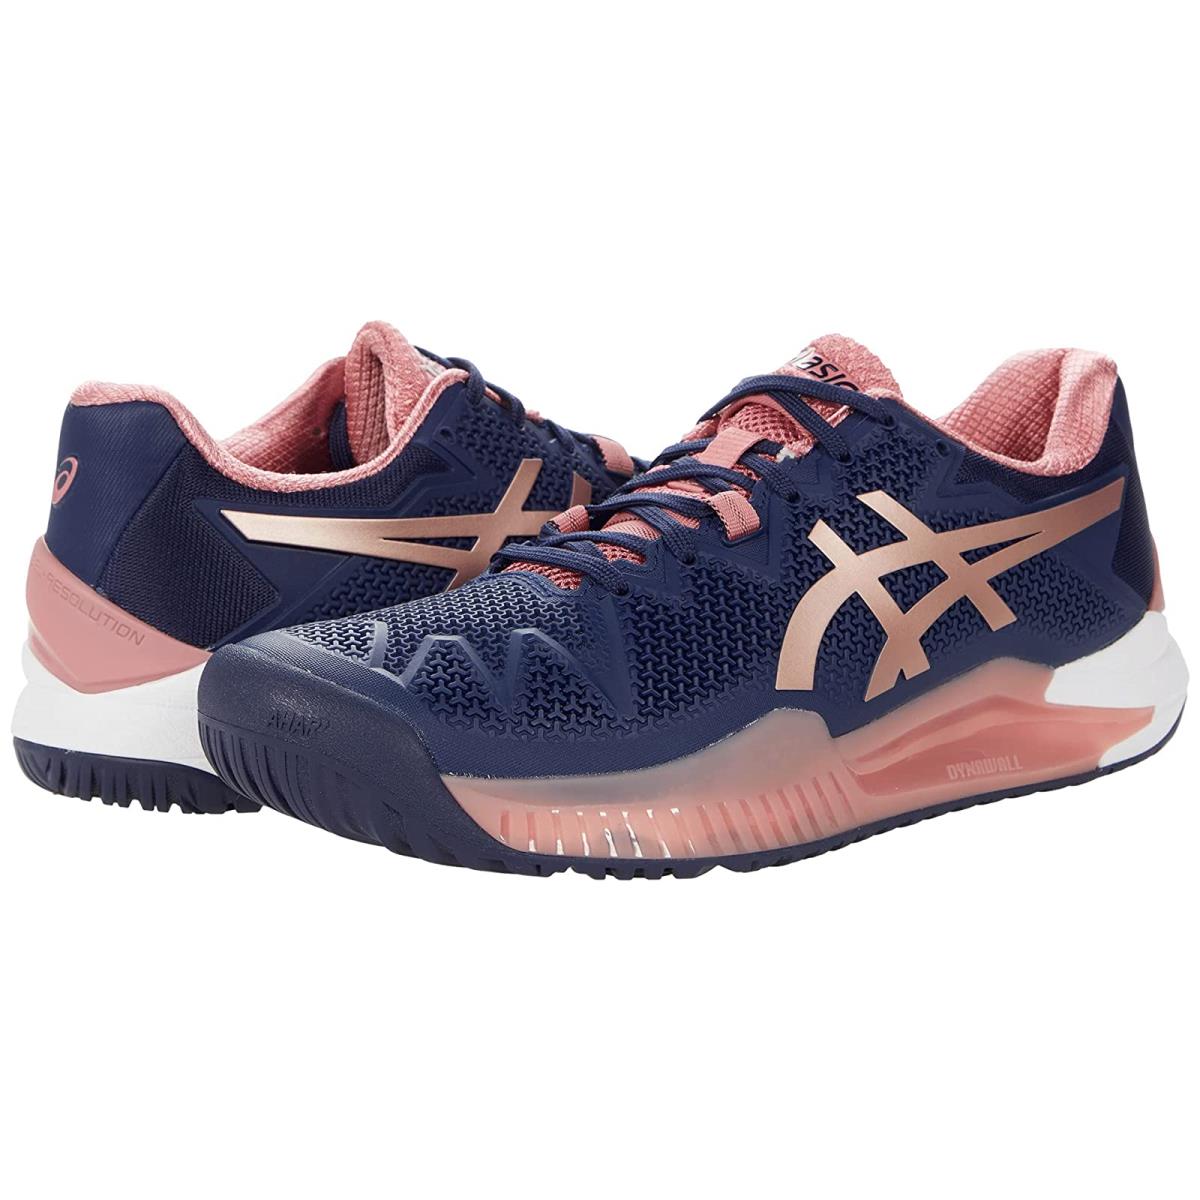 Woman`s Sneakers Athletic Shoes Asics Gel-resolution 8 Peacoat/Rose Gold